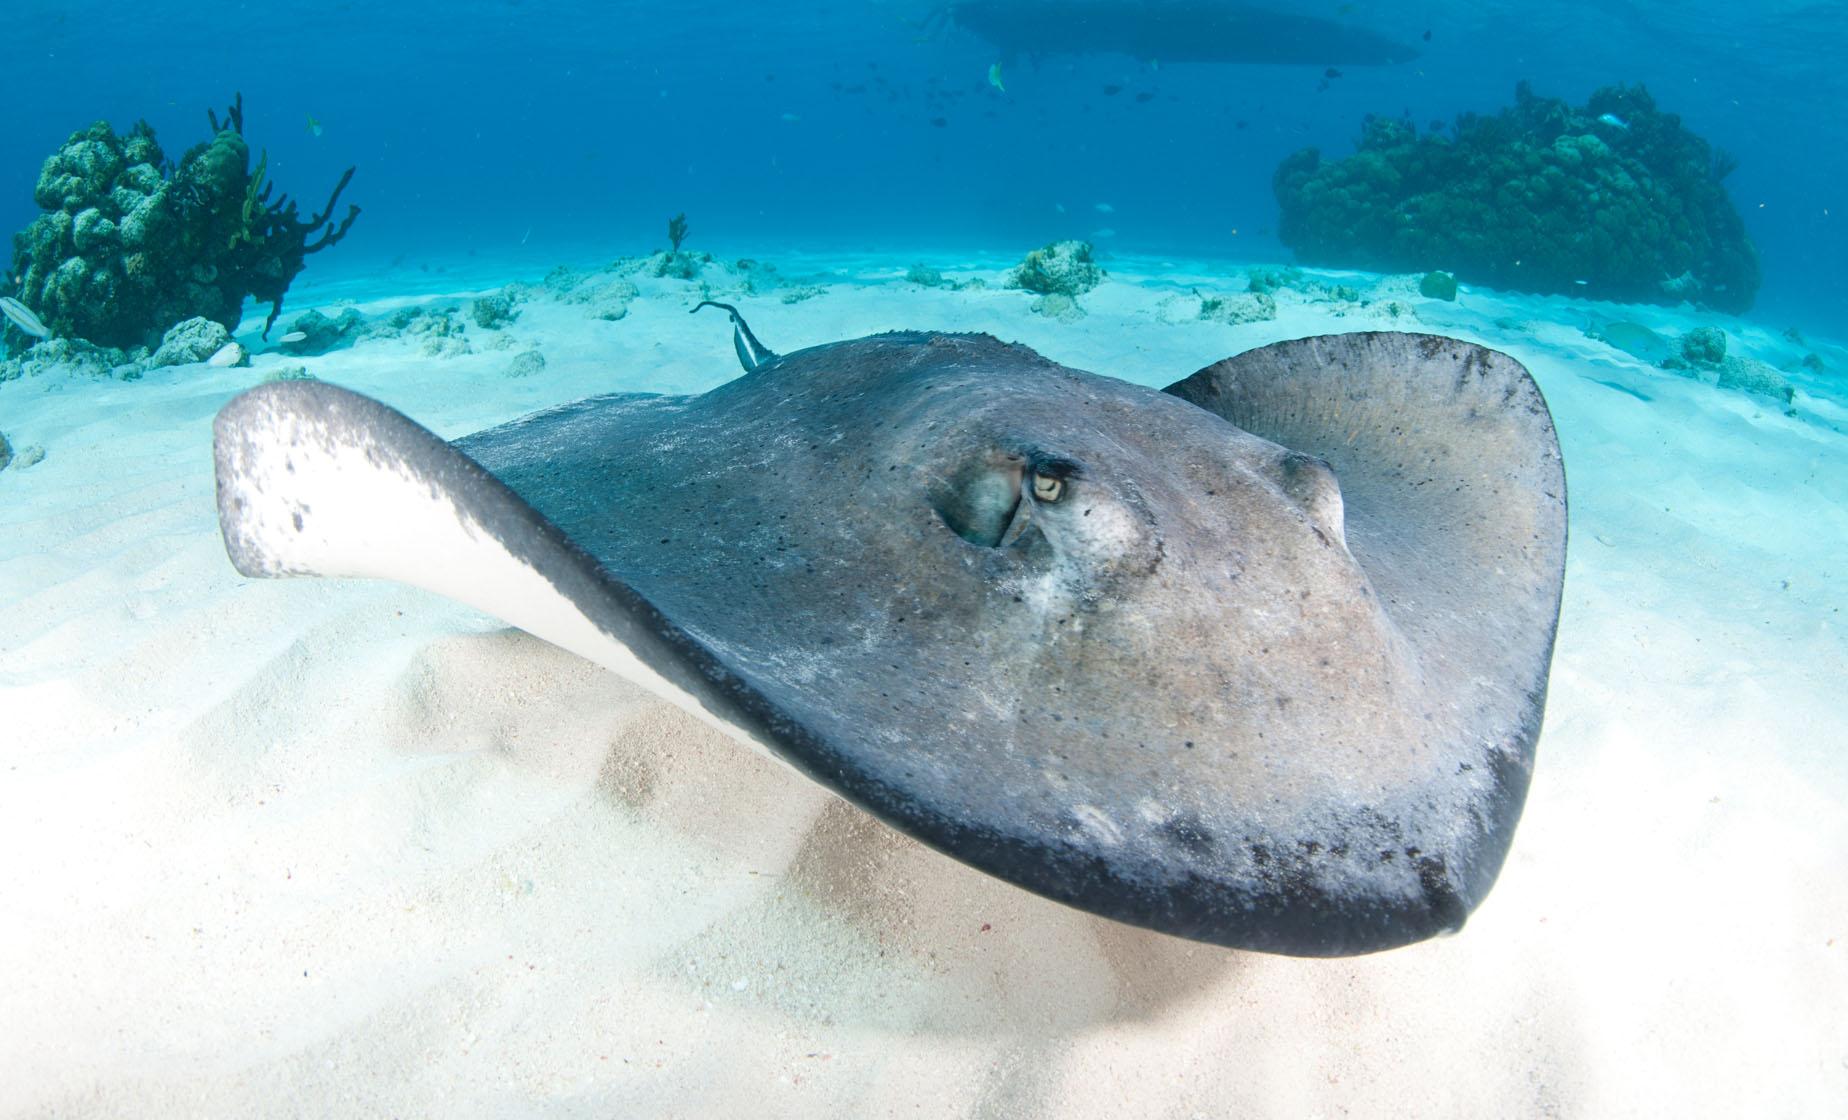 Feed and Pet Southern Stingrays on this Nassau Stingray Encounter Day Trip